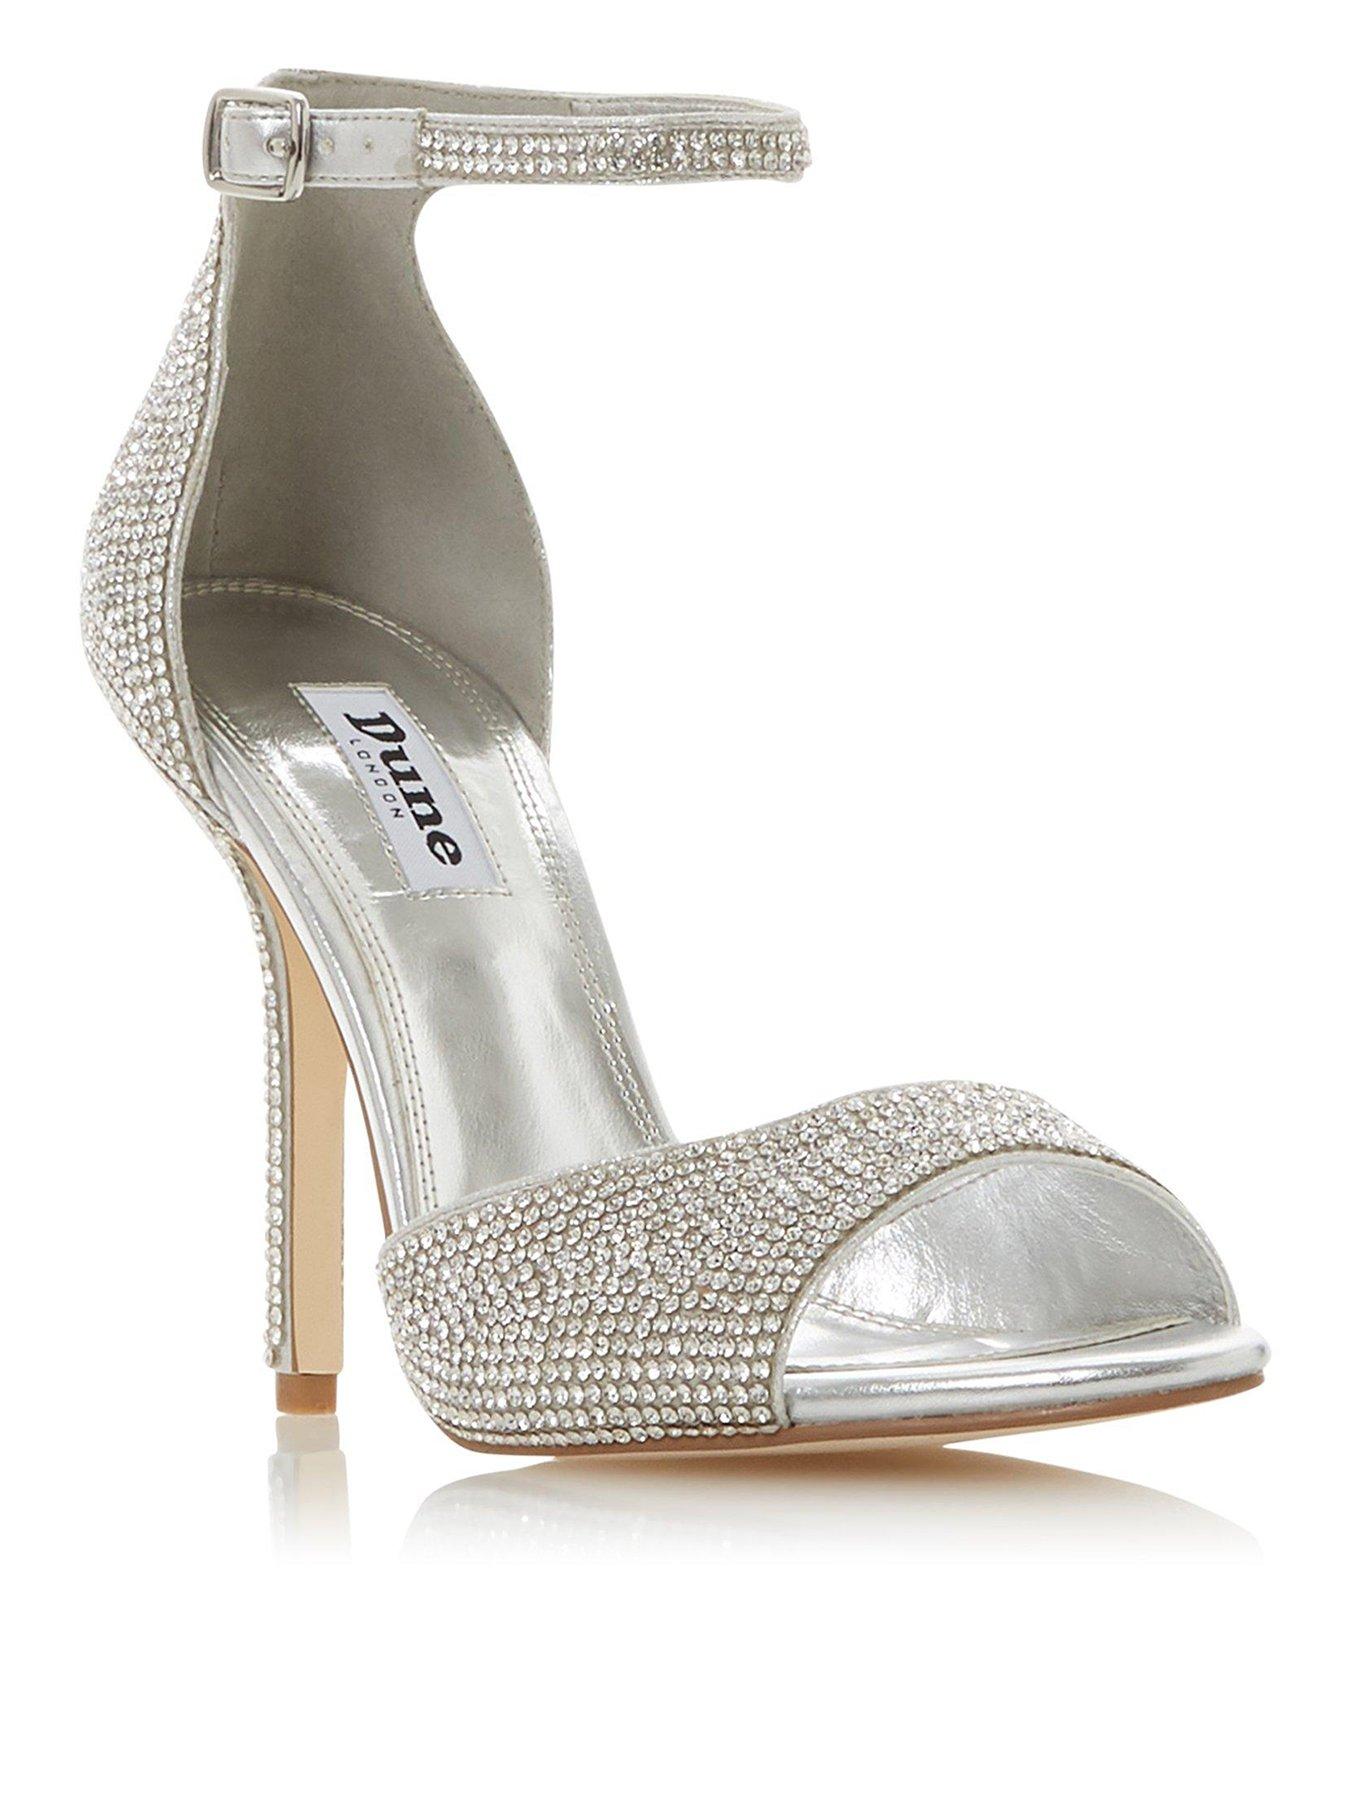 silver party shoes